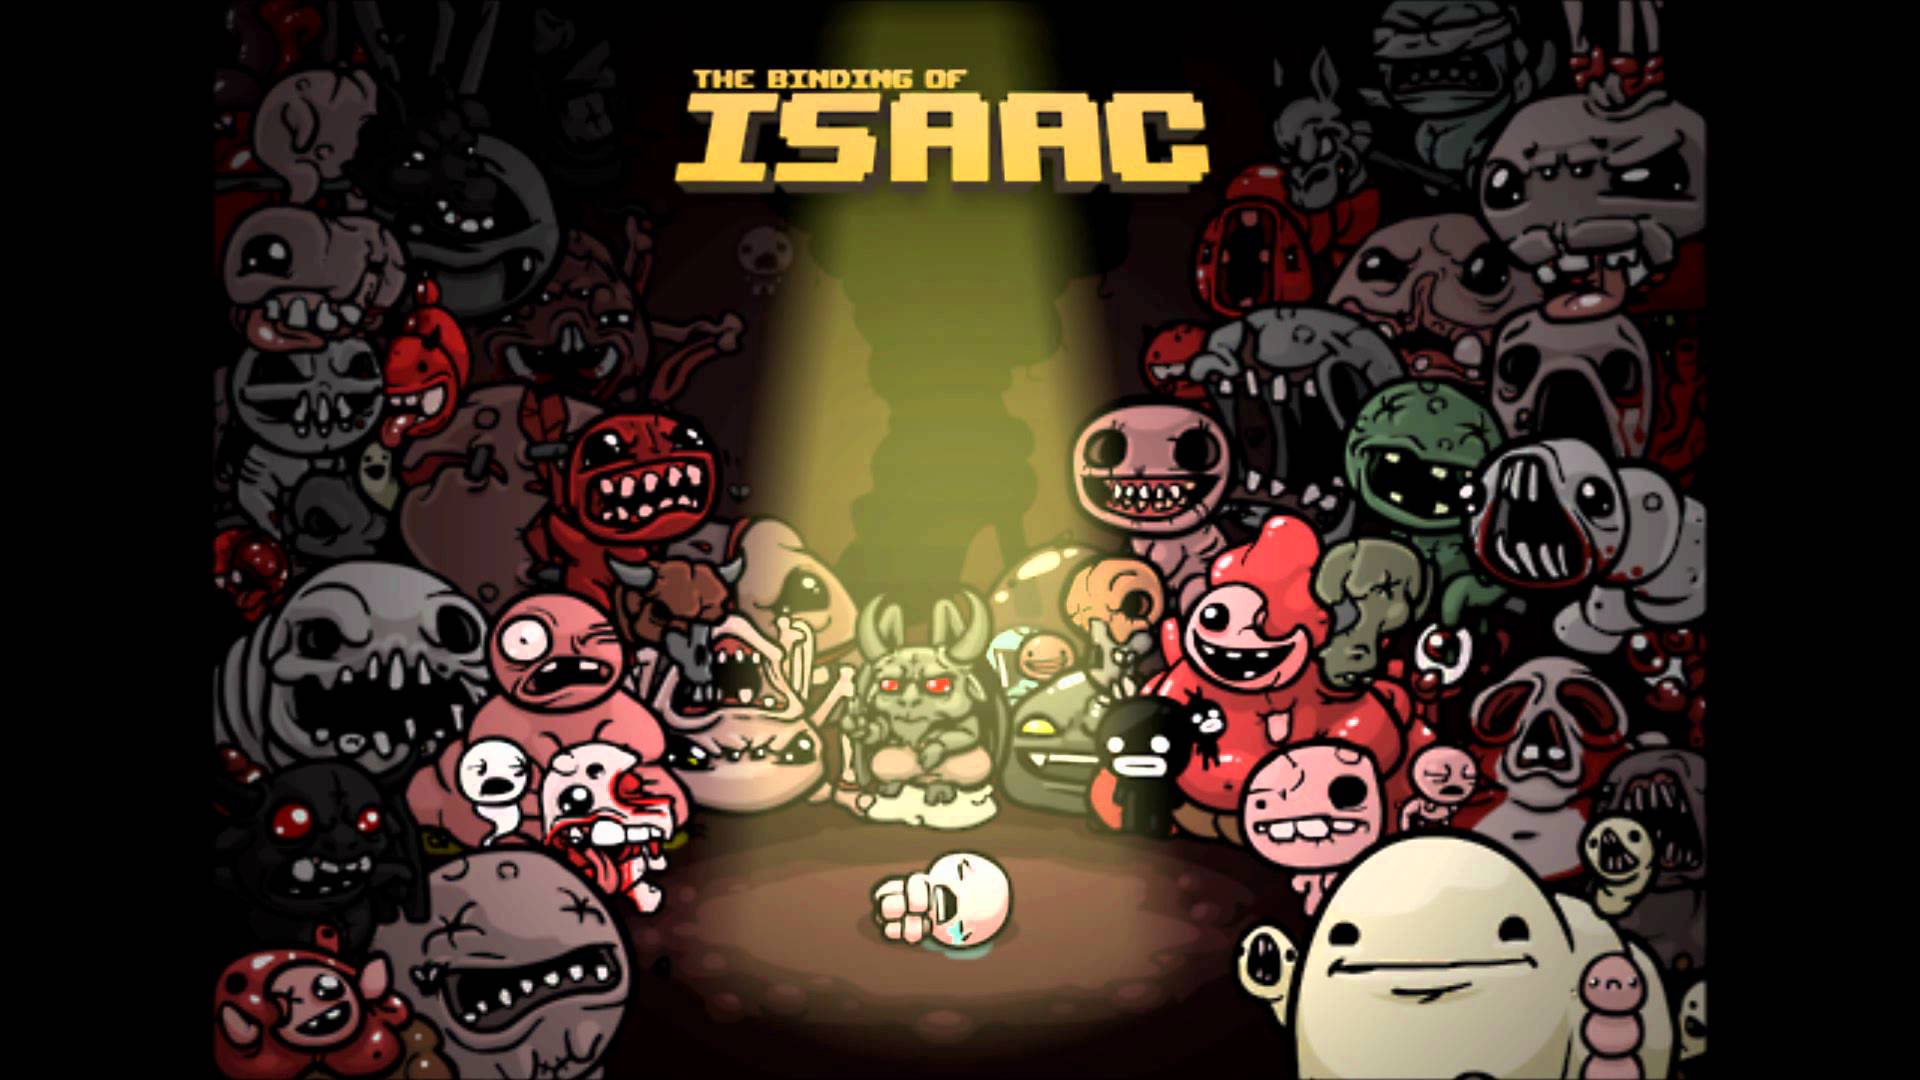 The binding of isaac download cracked full game unblocked